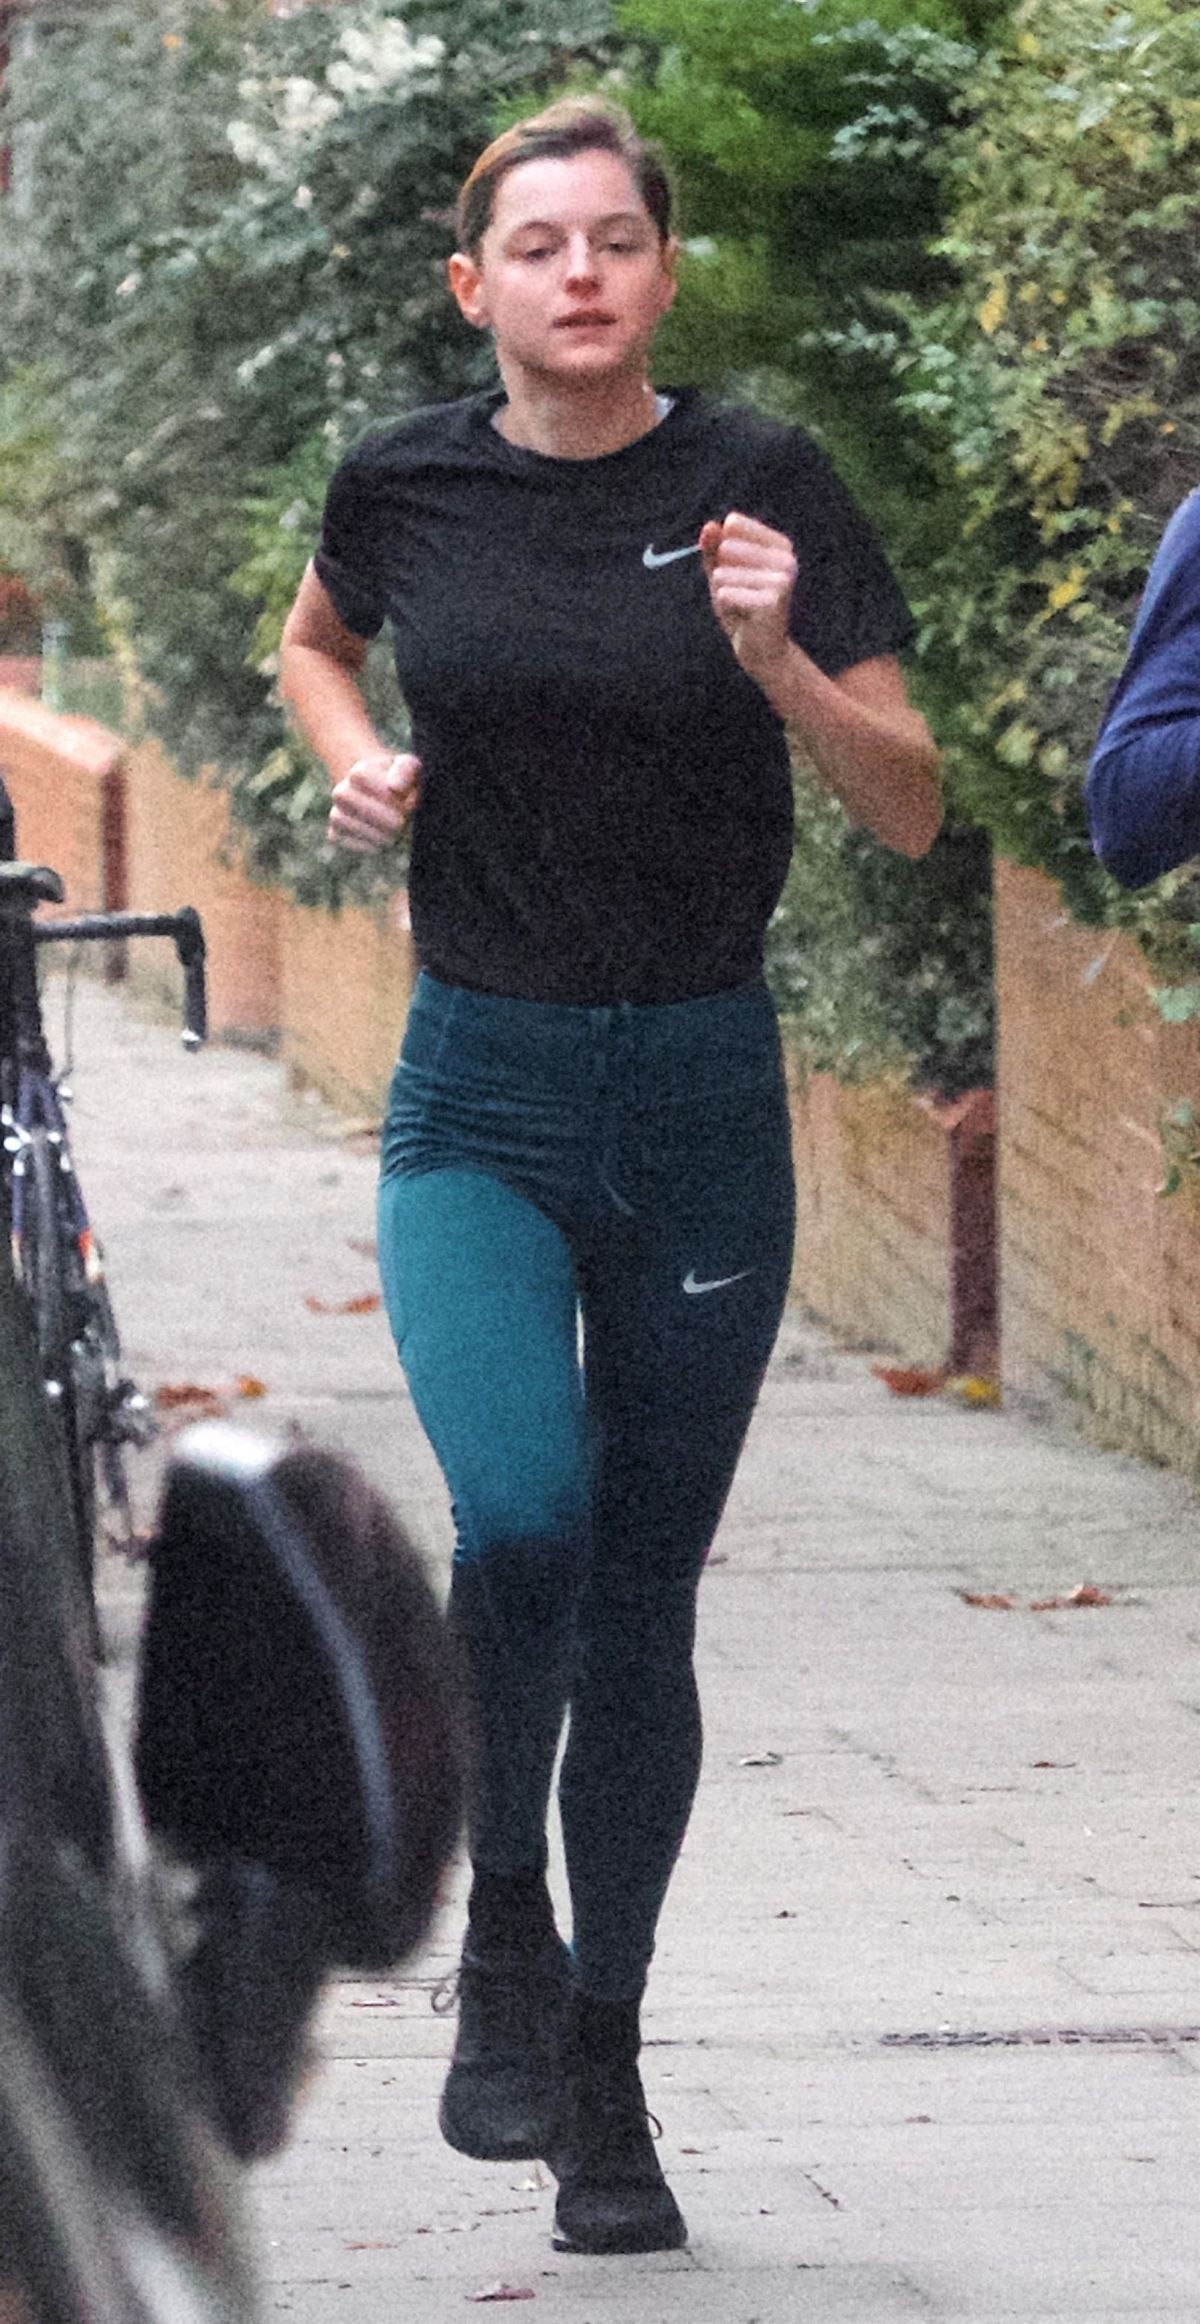 Emma Corrin Out Jogging with a Friend in London 2020/11/16